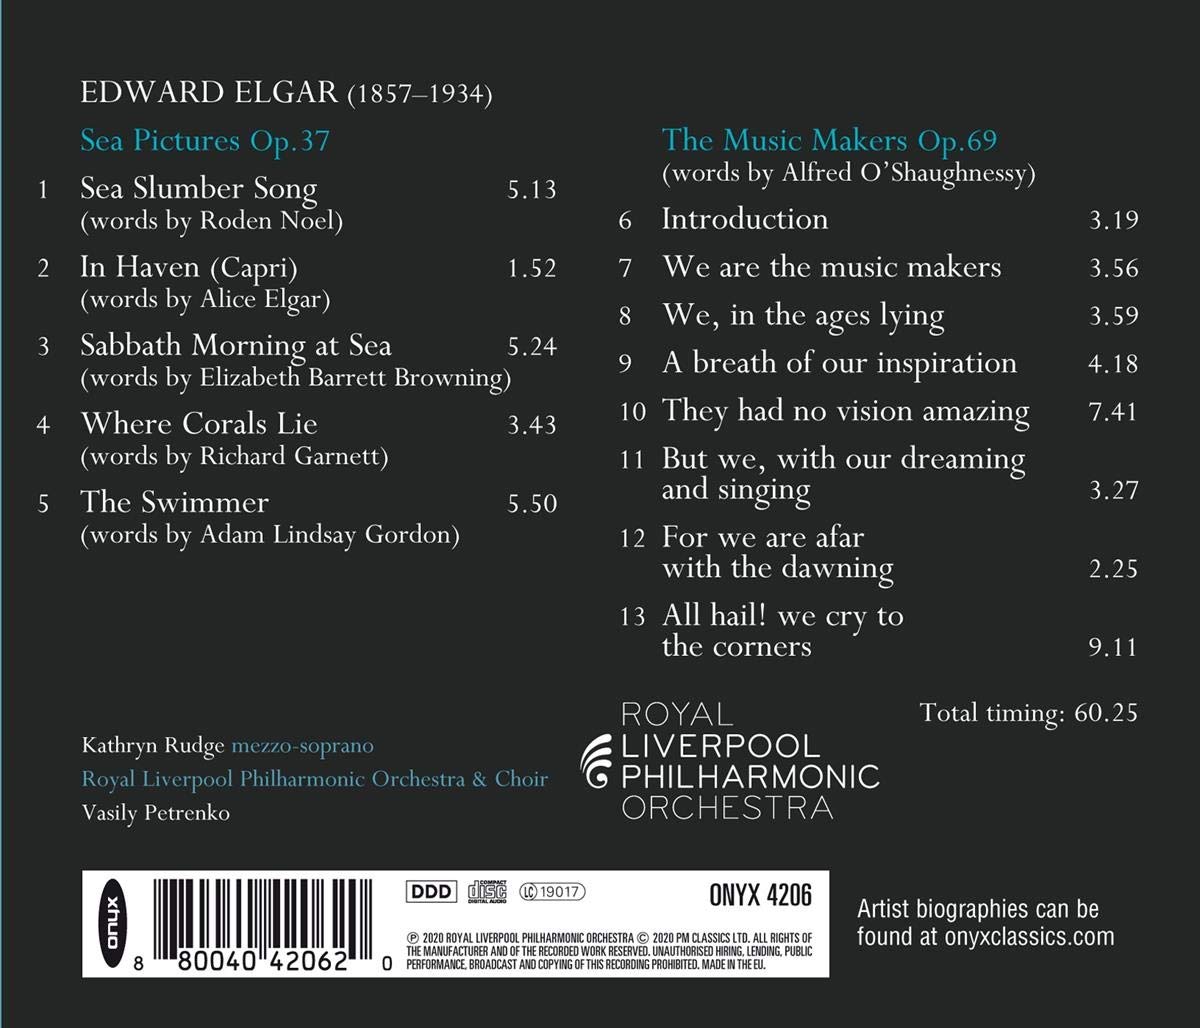 Kathryn Rudge 엘가: '바다 풍경', '뮤직 메이커스' (Elgar: Sea Pictures & The Music Makers) 